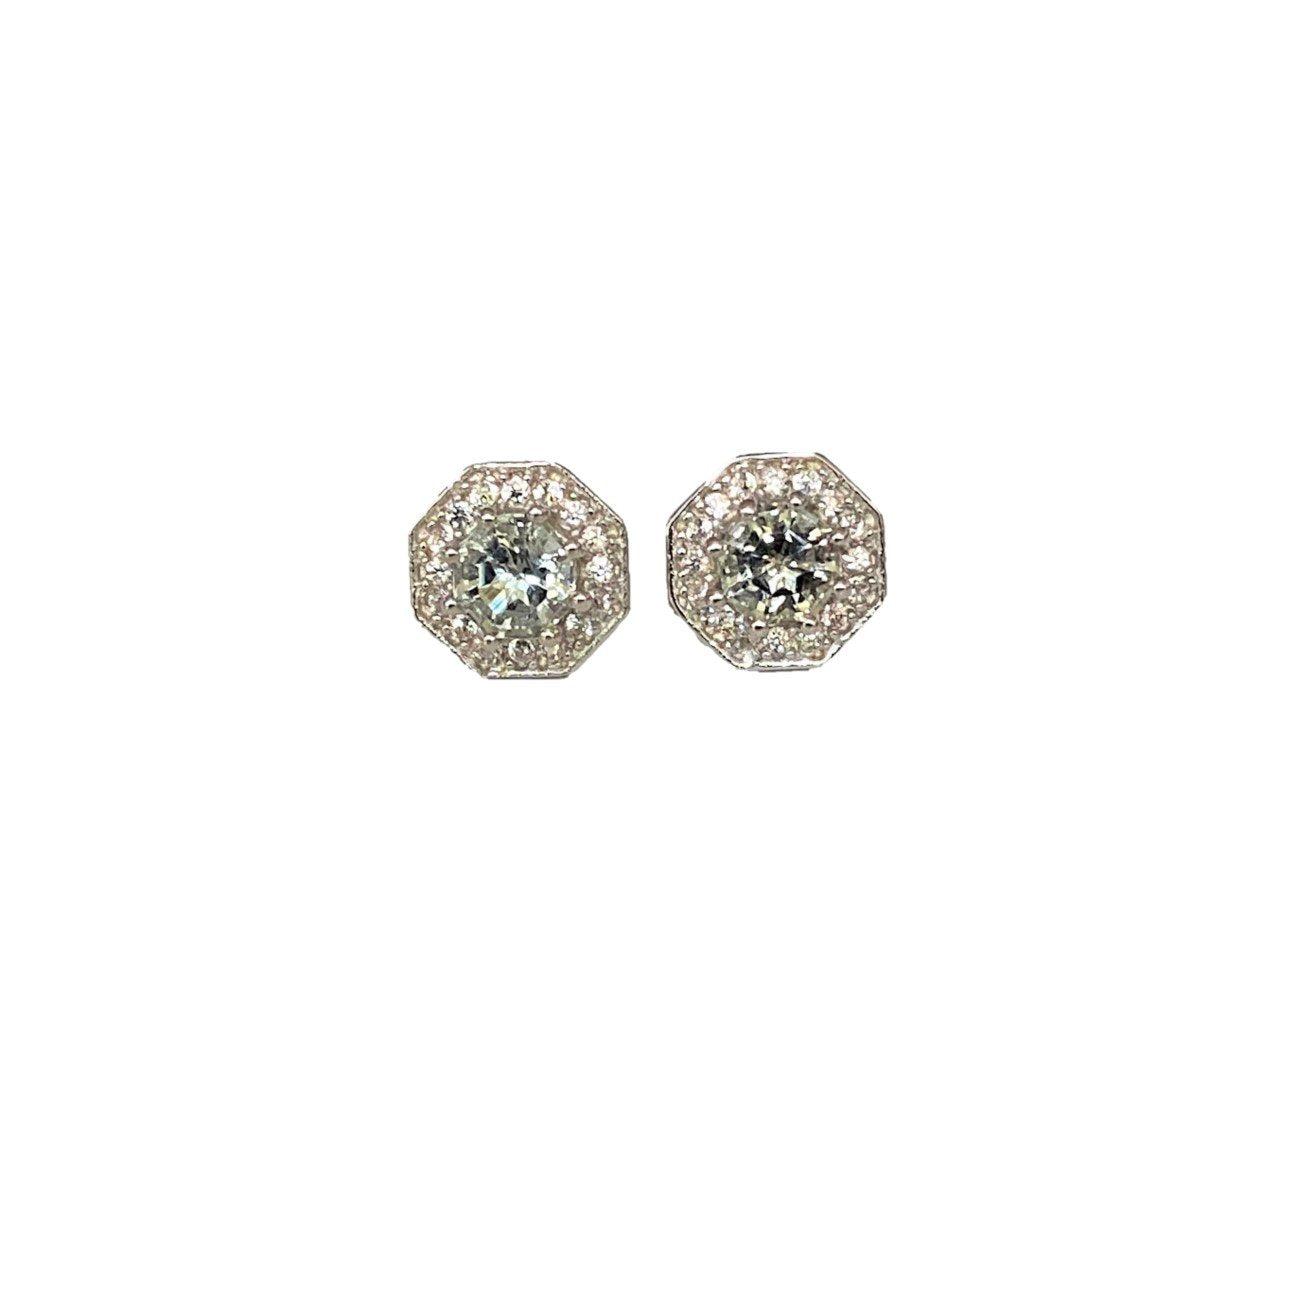 2.5ct. Prasiolite & Natural White Zircon Halo Stud Earrings, Sterling Silver fine jewelry gift for women